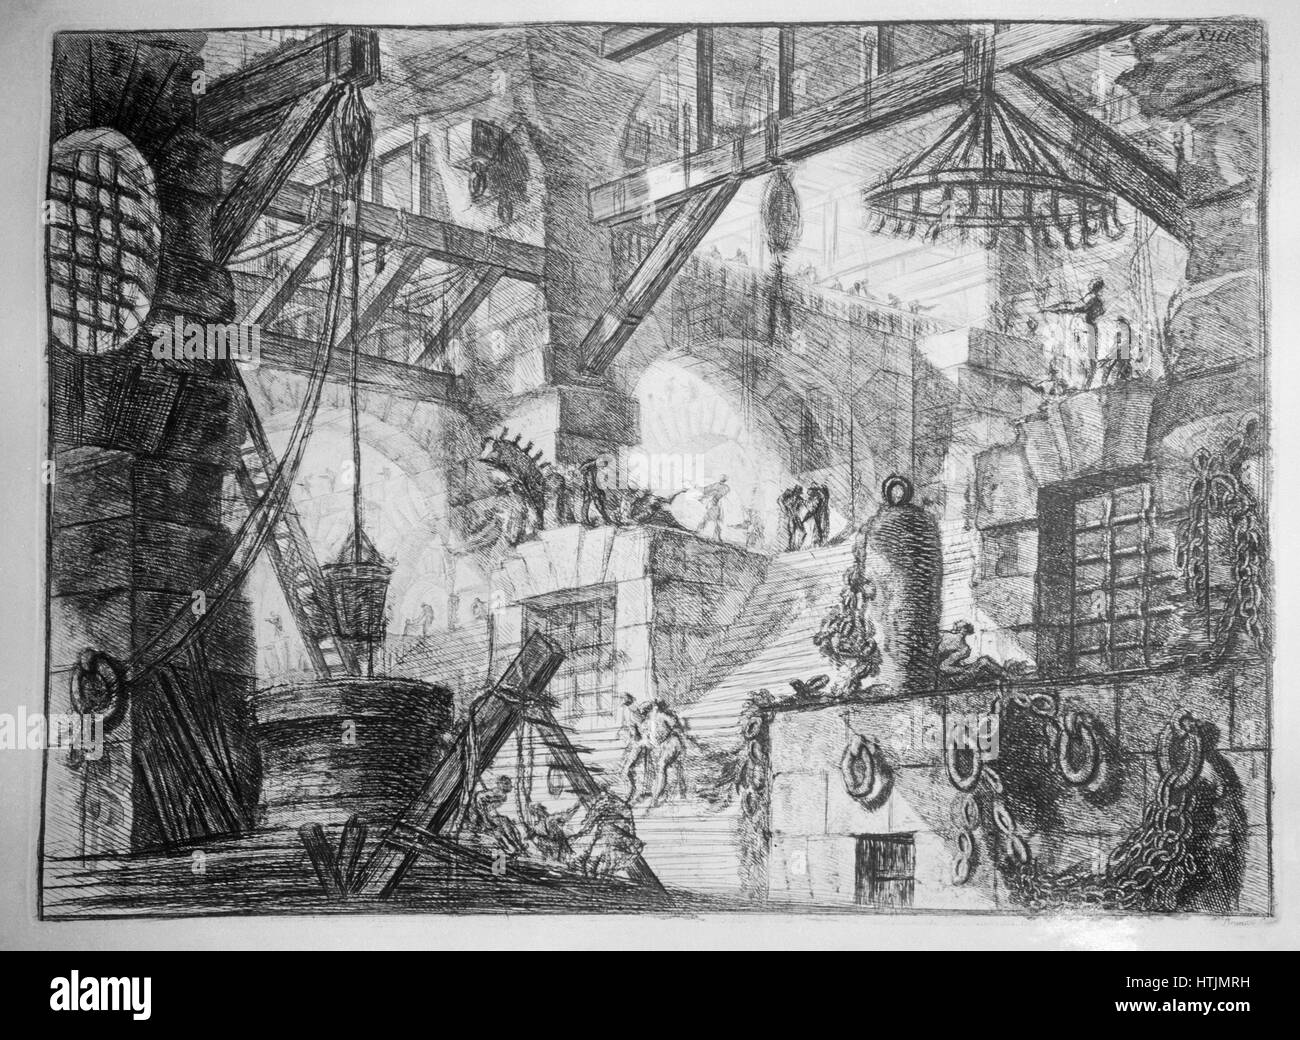 The Imaginary Prisons (Carceri d'invenzione), second version of the series of engravings by Giovanni Battista Piranesi, published in 1761. Plate XIII: The Well Private collection Stock Photo